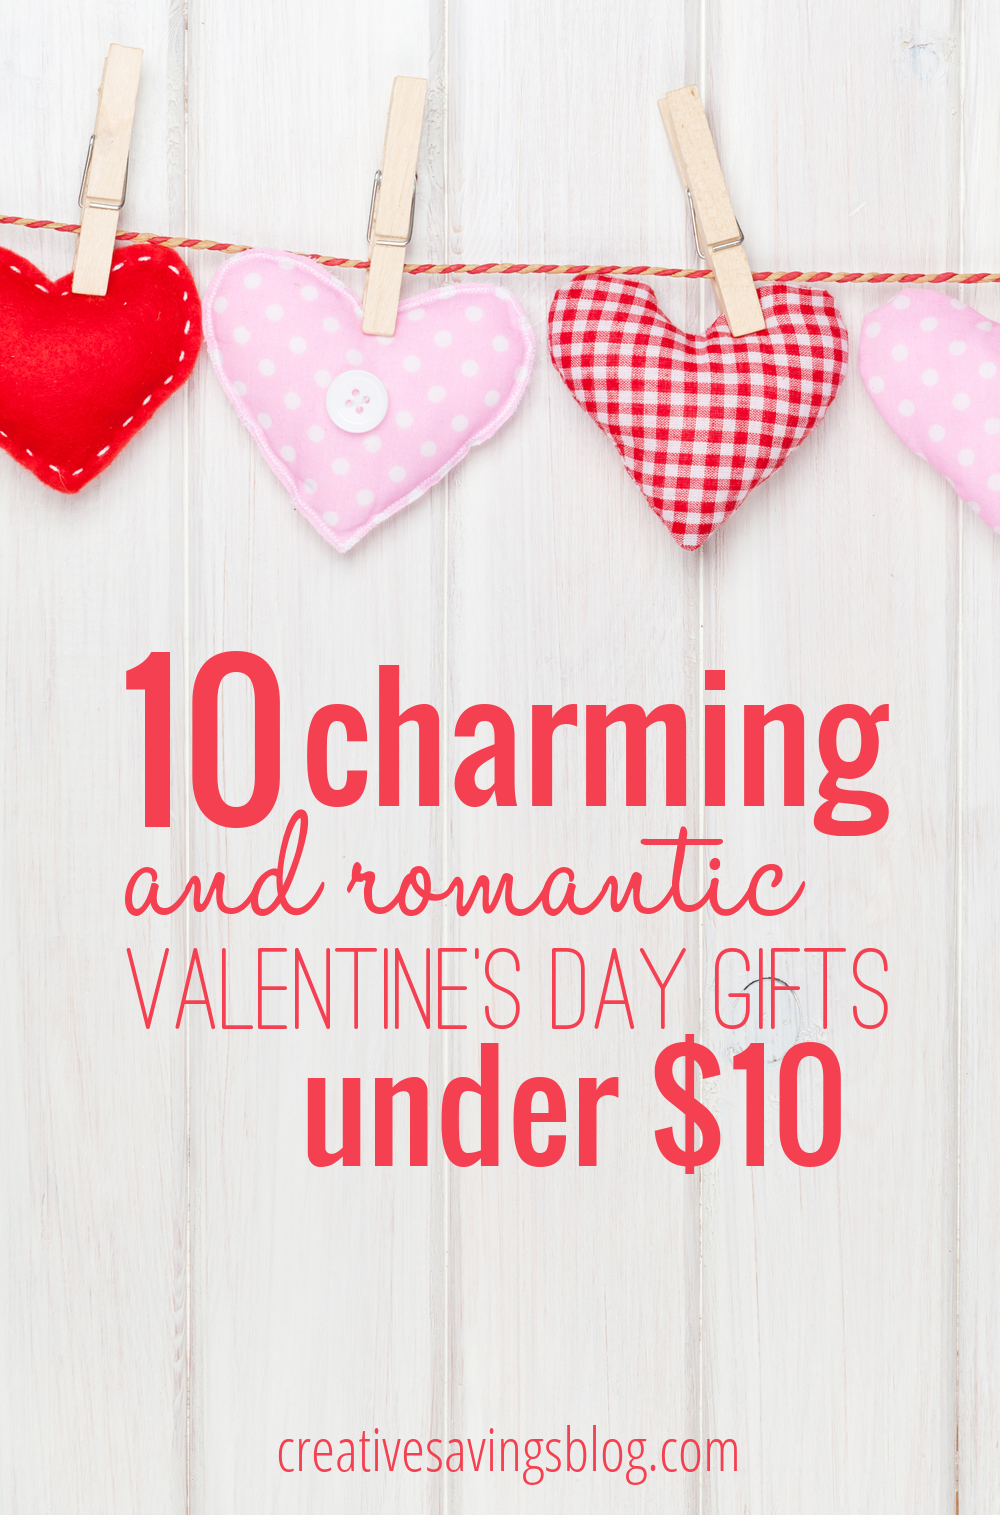 Valentine's Day is my FAVORITE holiday, but I'm not a natural gift-giver so I'm always looking for gift ideas for my husband. These particular gifts are charming and romantic, but they're just the right size for my wallet too! #valentinesday #holidays #valentinesdaygiftideas #valentinesideas #valentinesgifts #romanticgiftideas #frugalgiftideasforvalentines #frugalvalentinesgifts